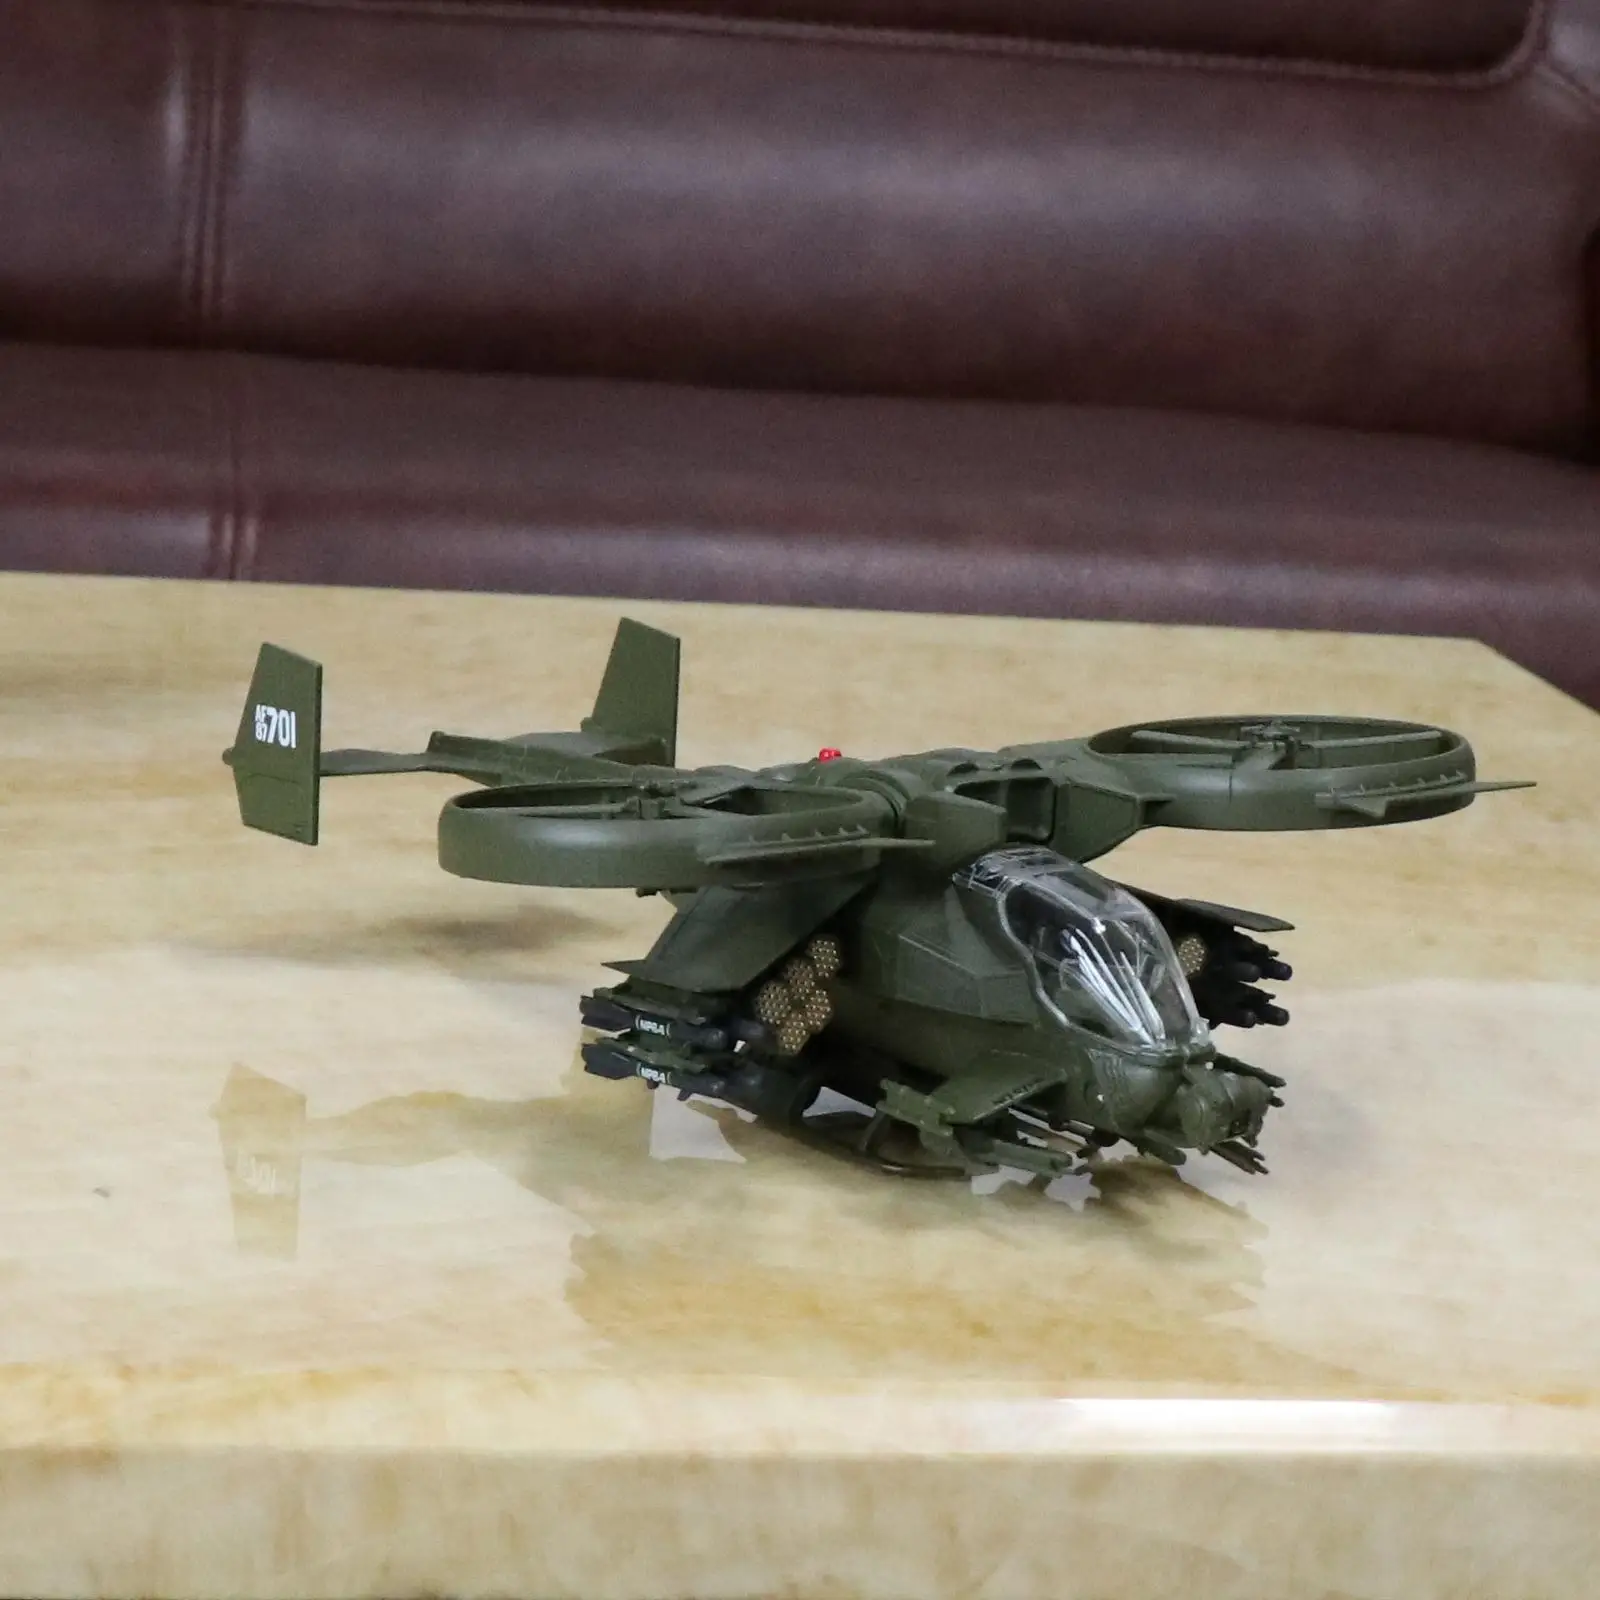 1 / 48th Scorpion Armed Helicopter Model Diecast Gunship Toy